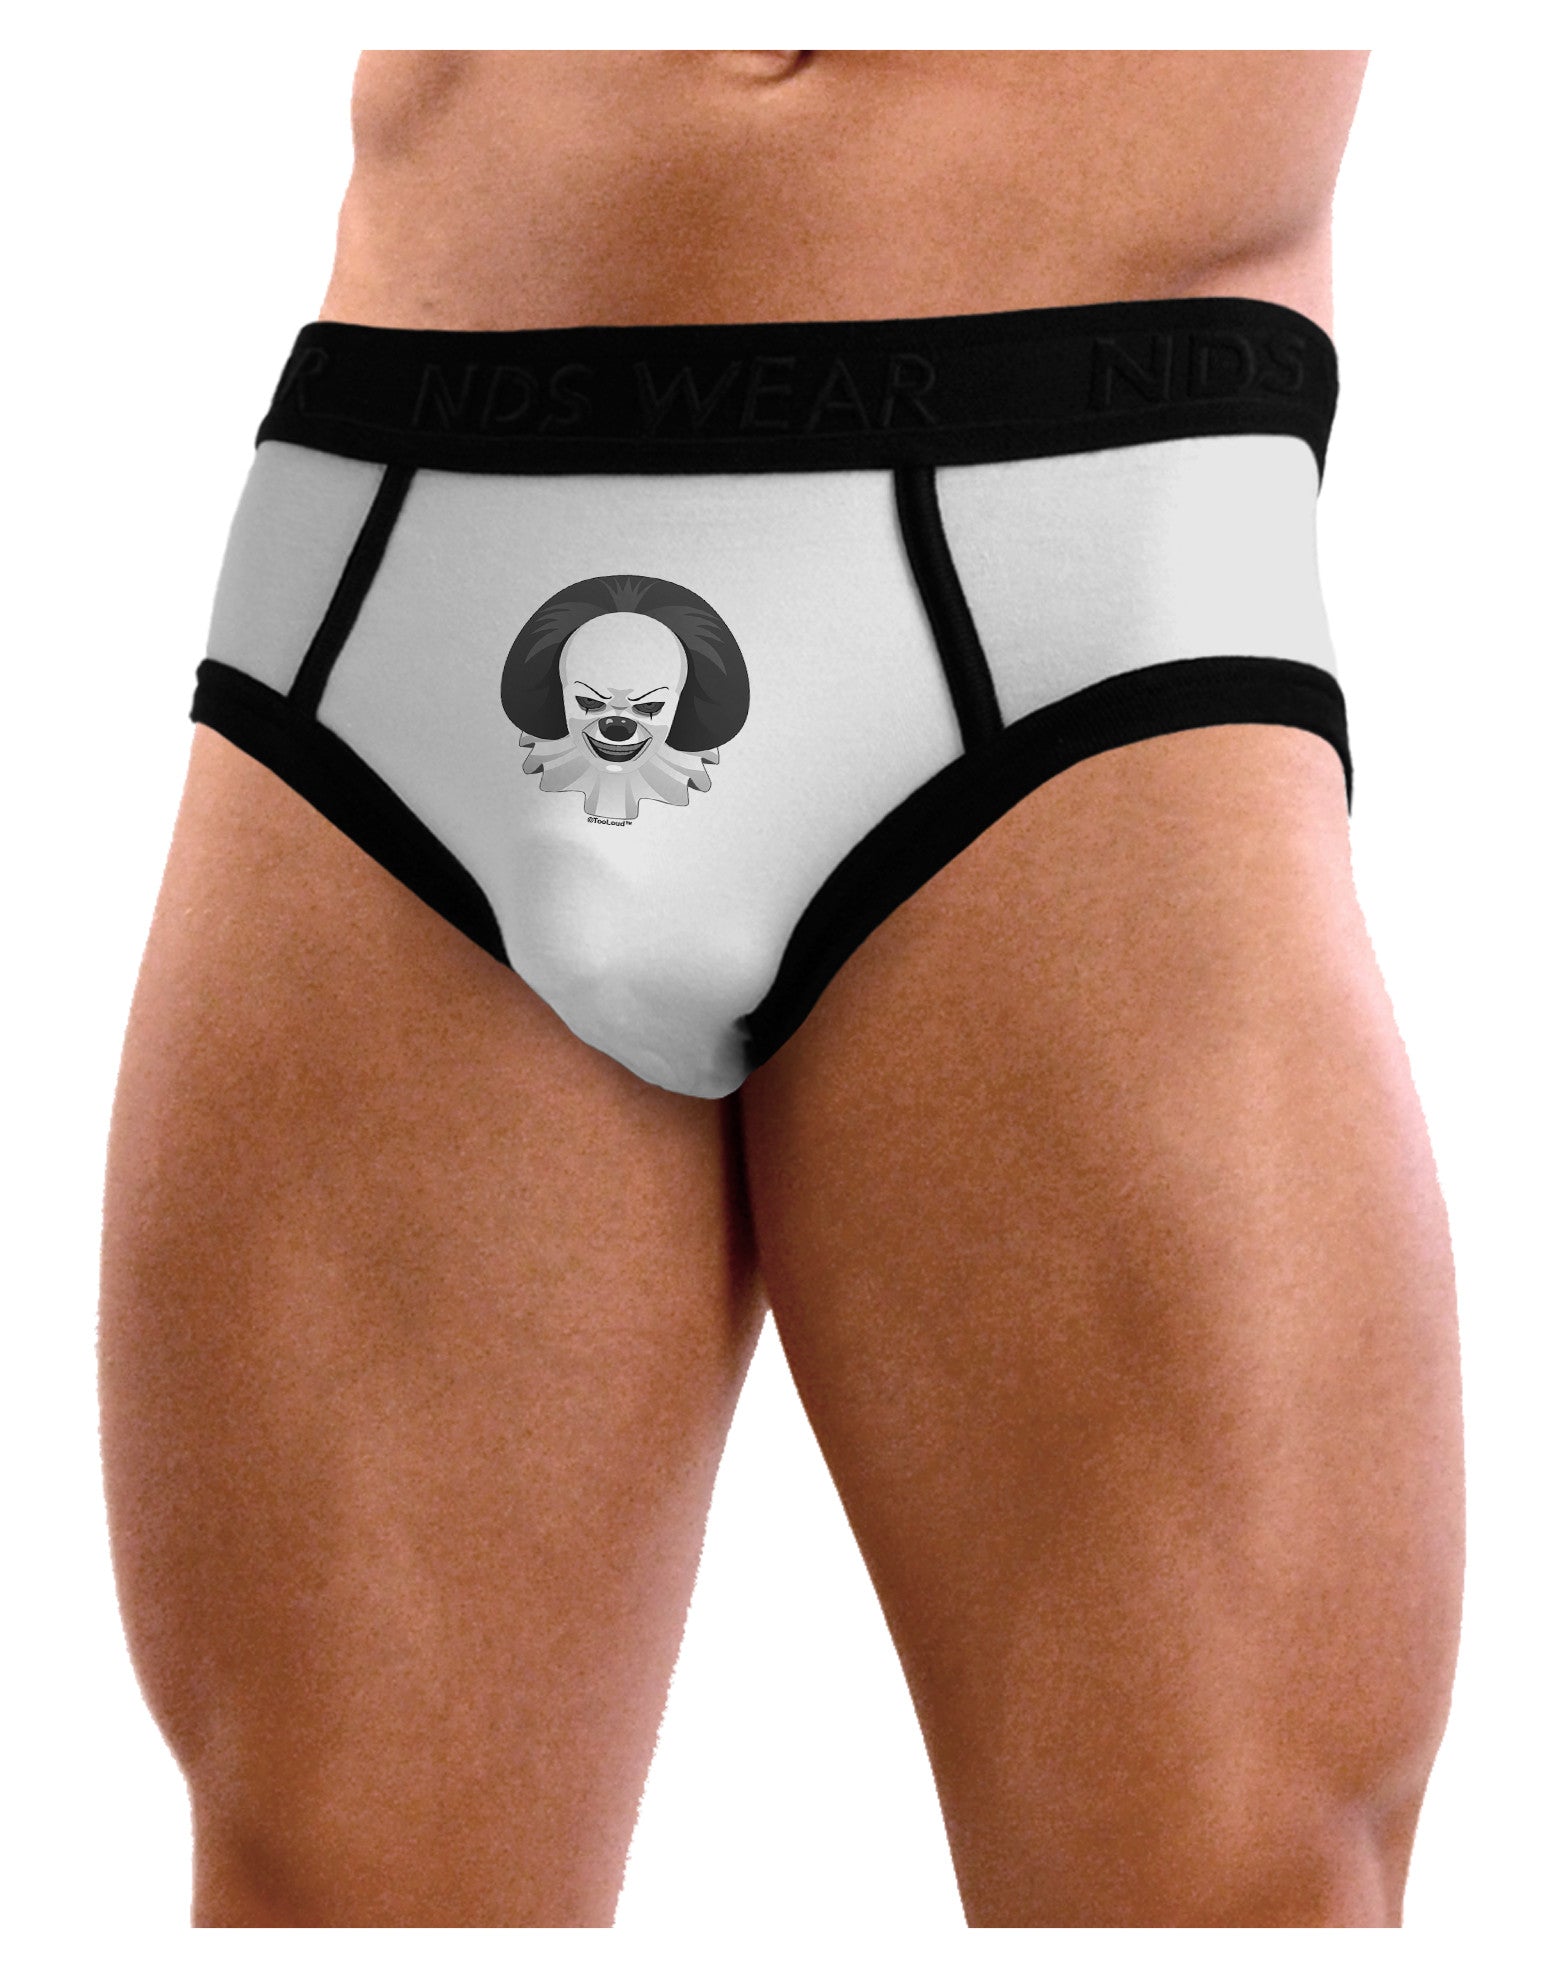 Scary Clown Grayscale Mens NDS Wear Briefs Underwear White / Large